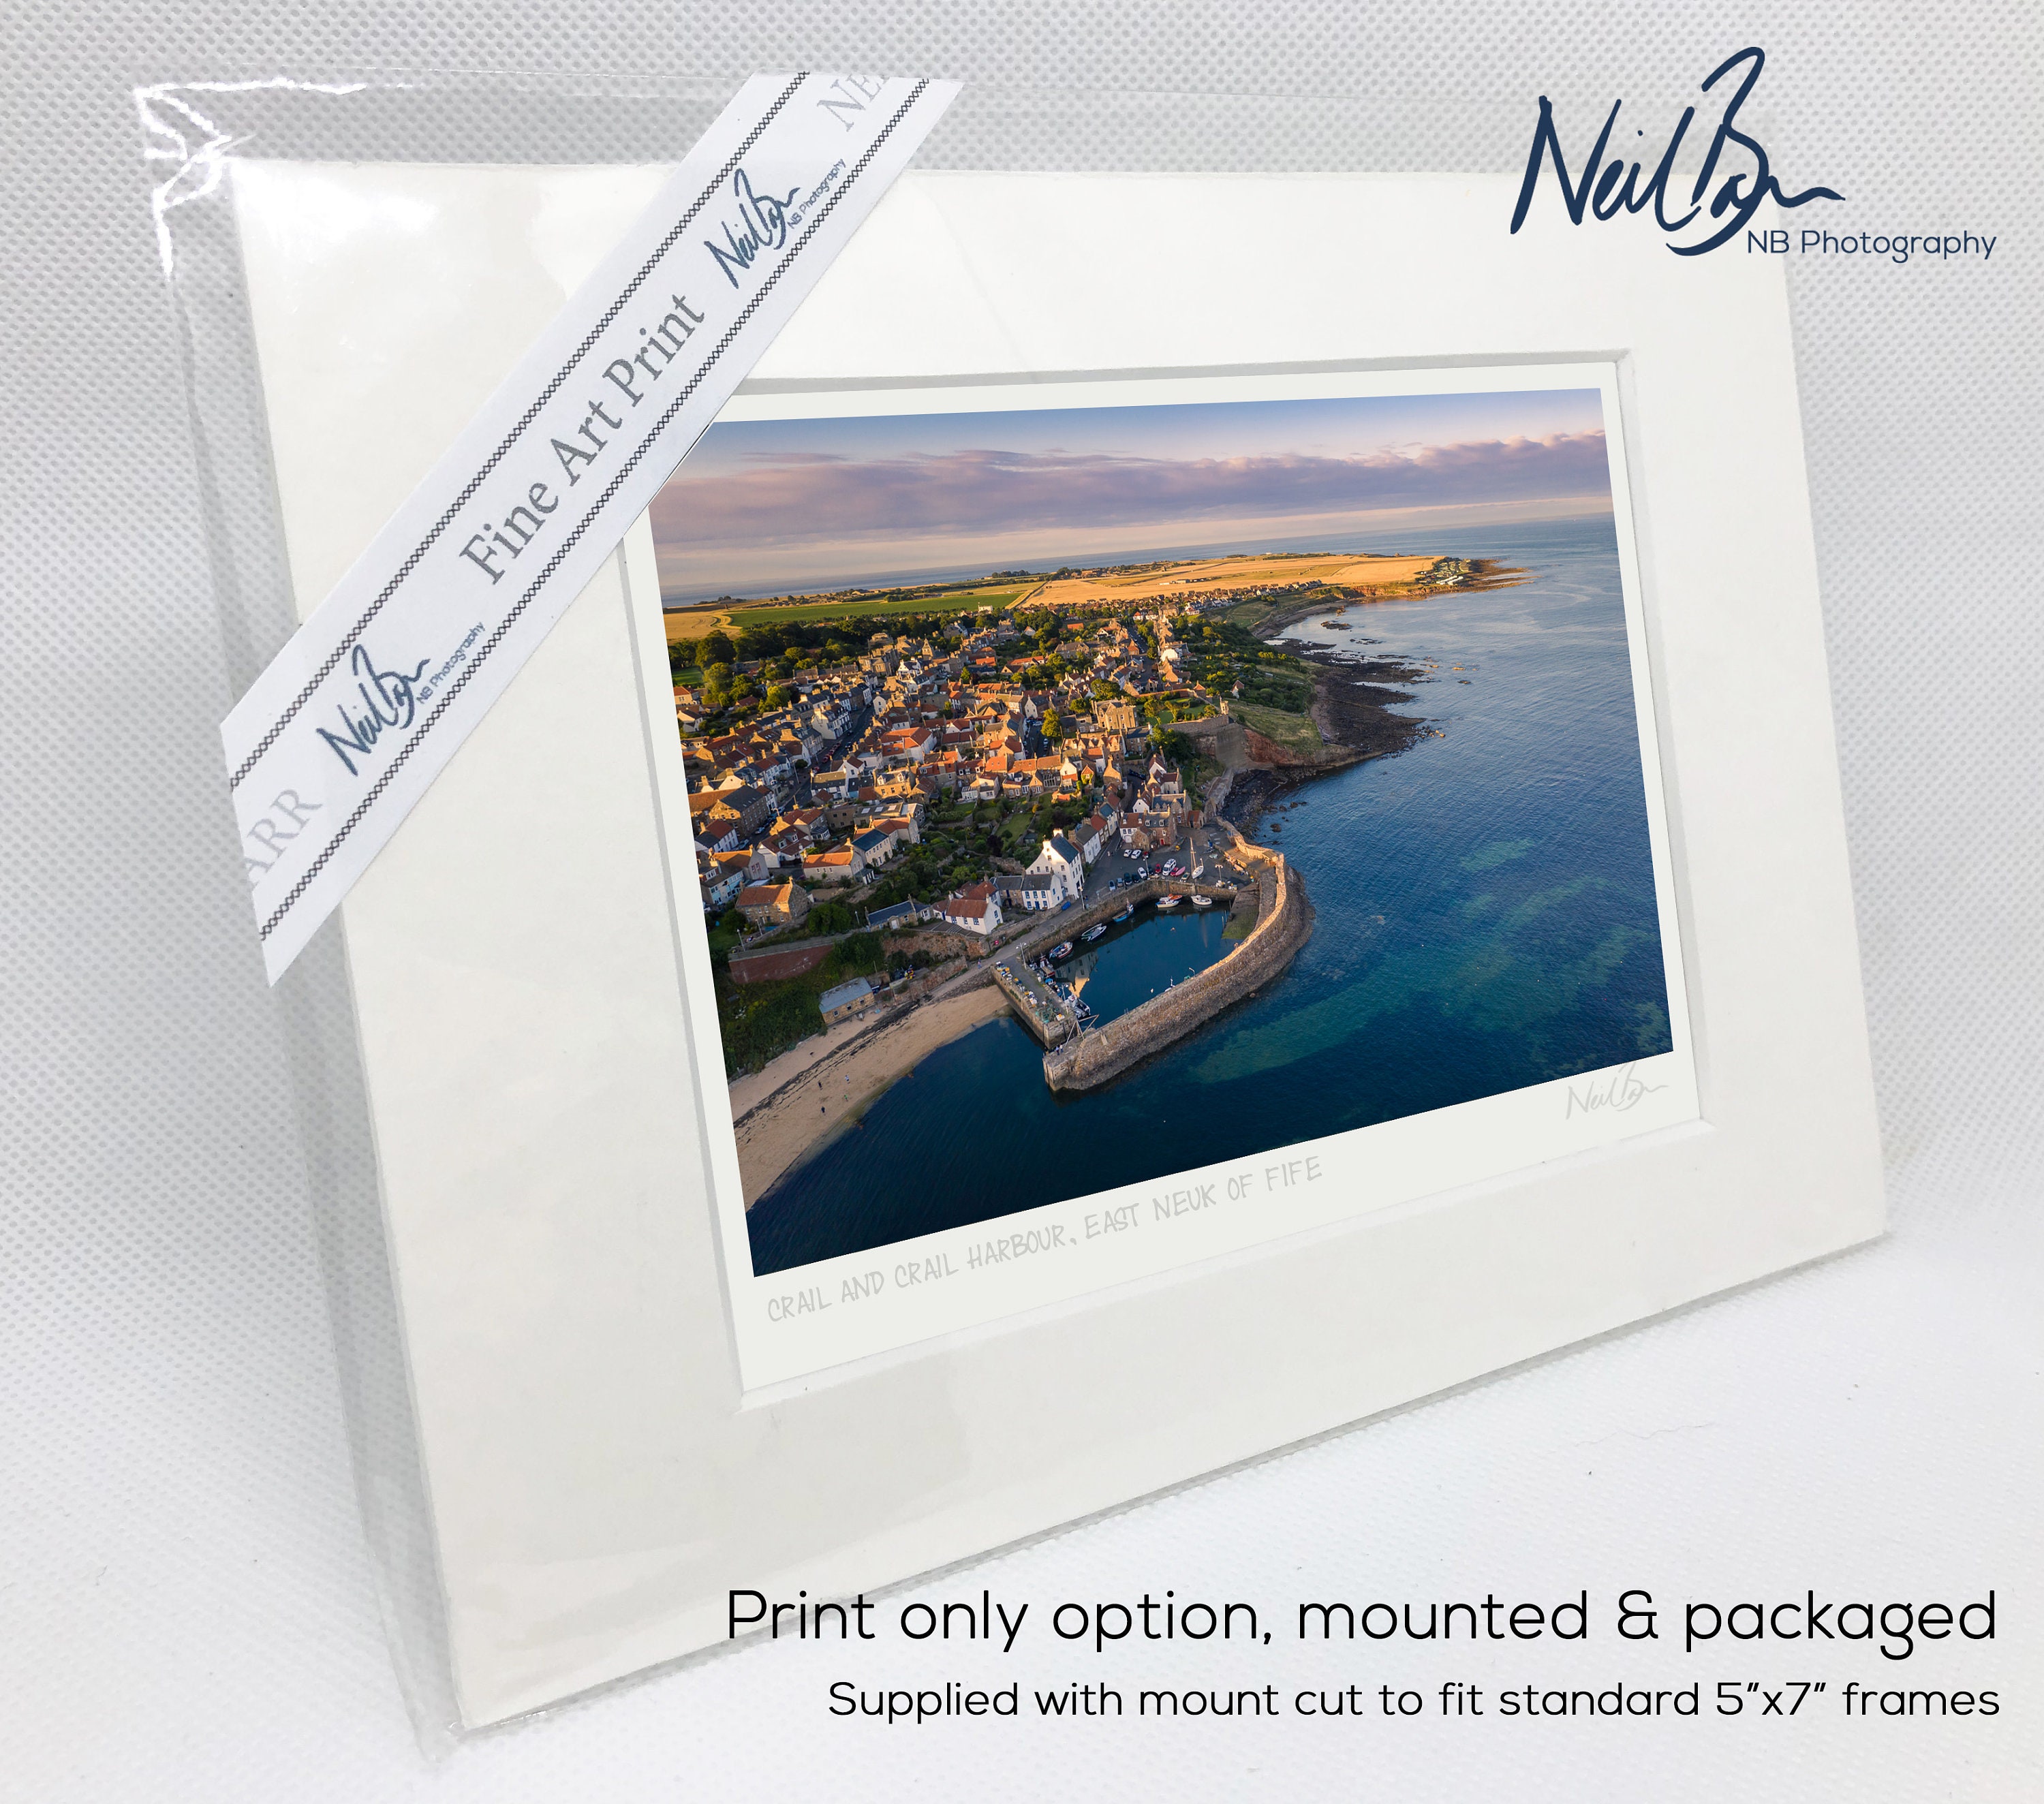 A6 East Neuk of Fife Scotland 7 x 5 Framed Scottish Fine Art Photo Print by Neil Barr of NB Photography A6 Crail & Crail Harbour